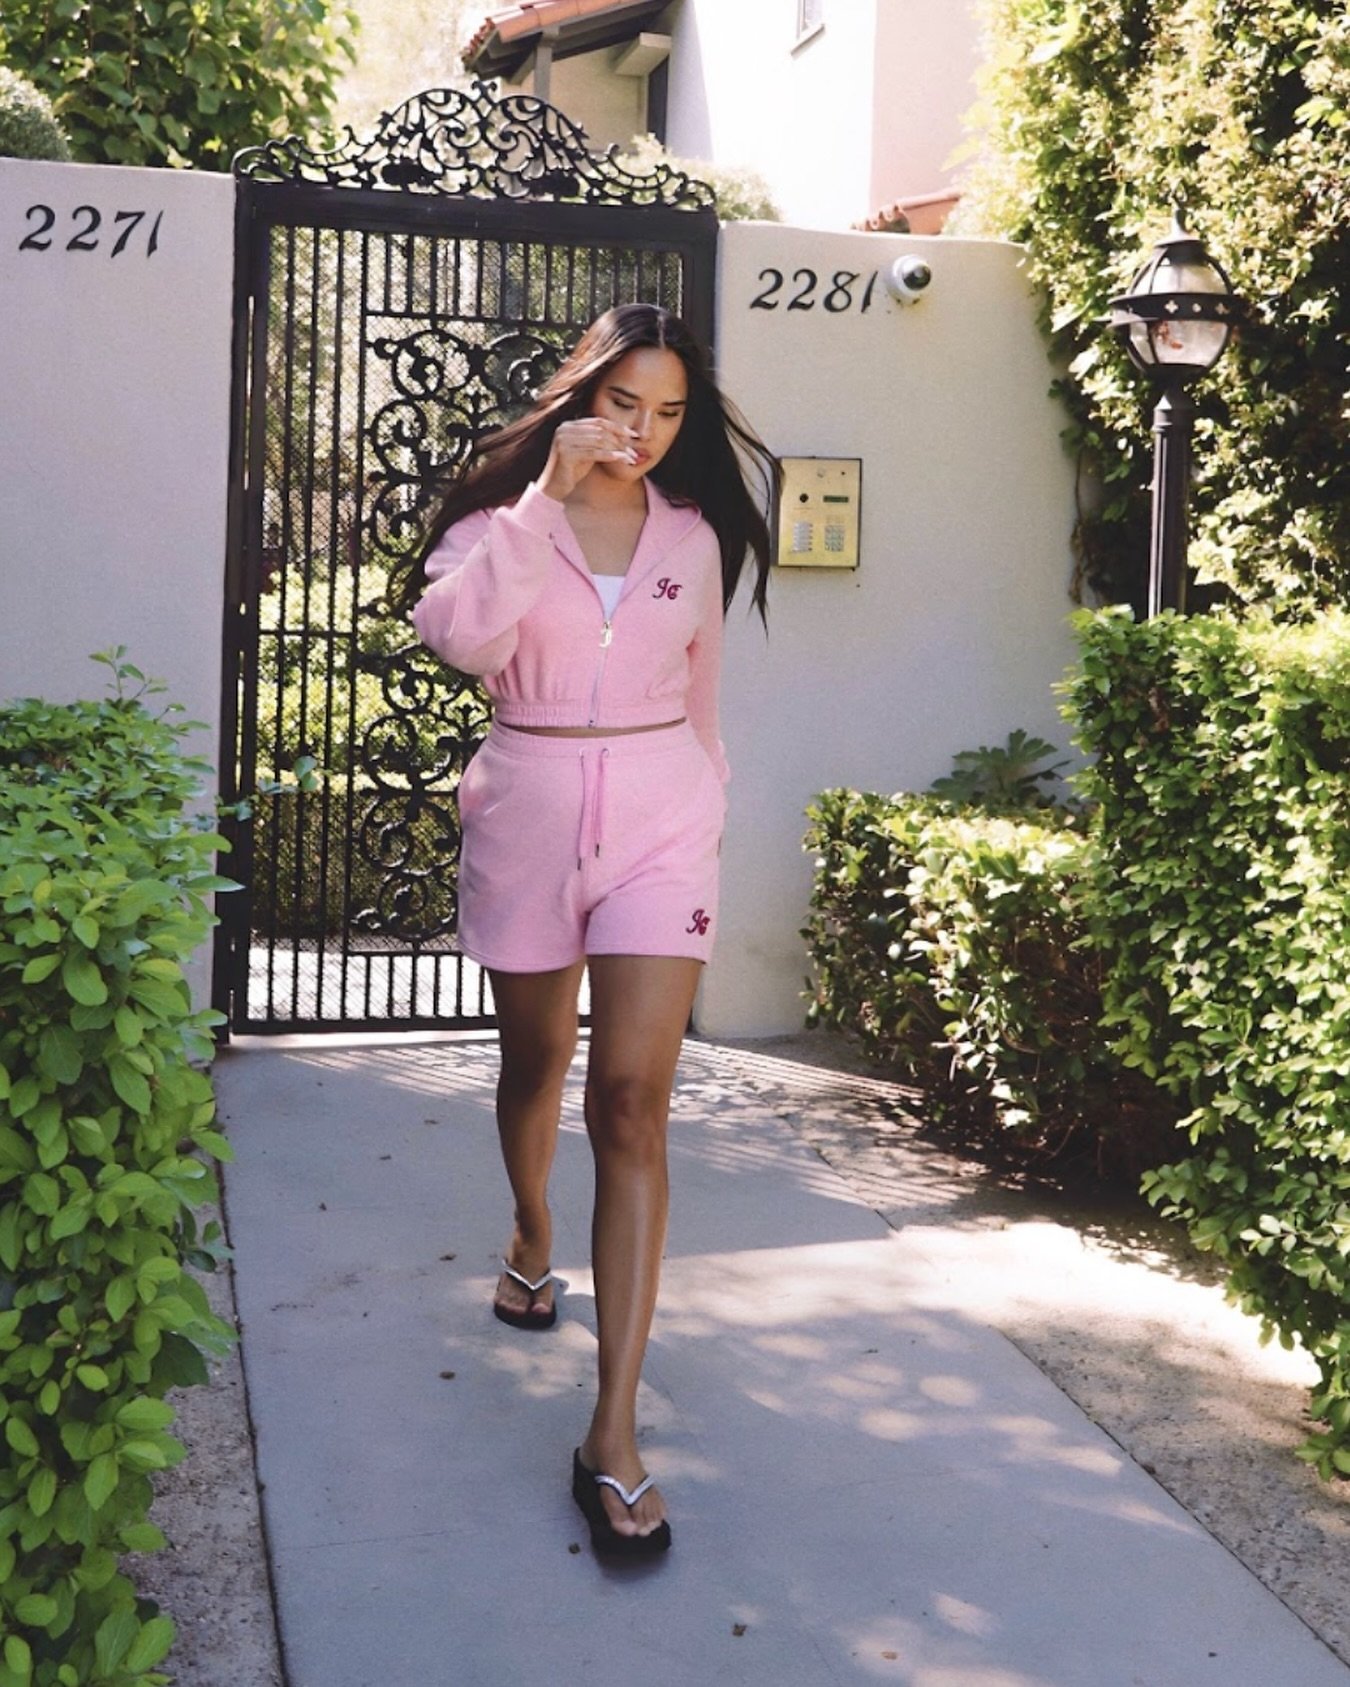 @kehaulanisanares PAPPED IN OUR CANDY PINK RETRO LOOSE FIT SET

SHOP NOW
www.juicycouture.co.uk 
www.juicycouture.eu 
#JuicyCoutureUK #JC

Shoot credits
Photographer: @the.twins.shot.this 
Talent: @kehaulanisanares 
HMUA: @_jordanalex 
Production: Na